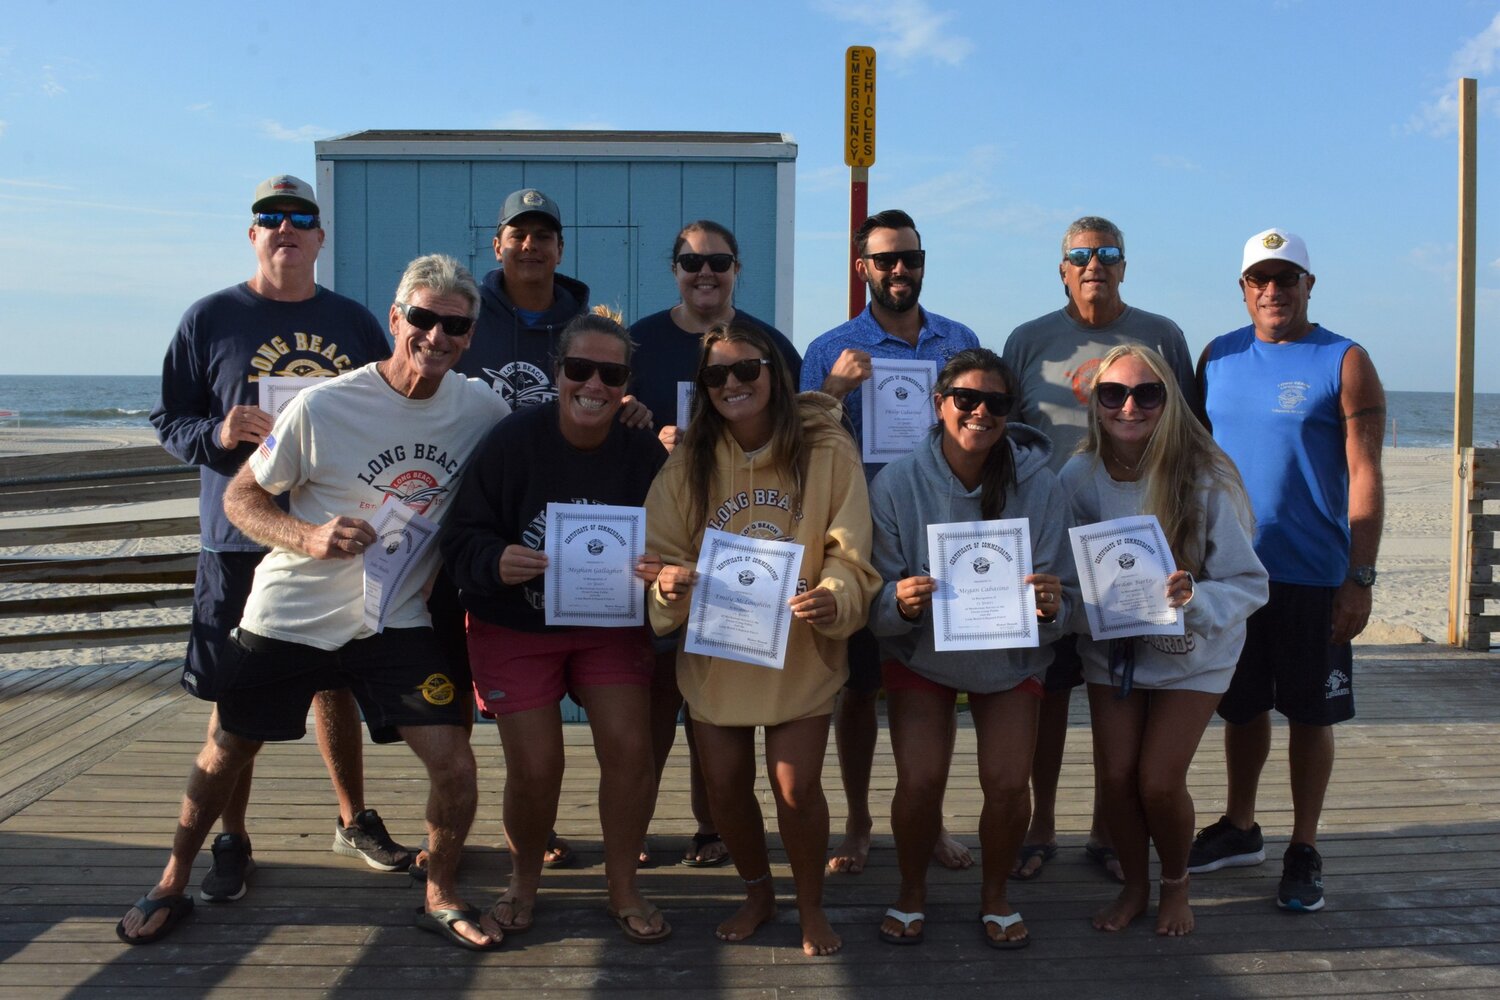 The Long Beach Lifeguard Alumni Association recently announced its annual scholarship awards for deserving college-bound city lifeguards.